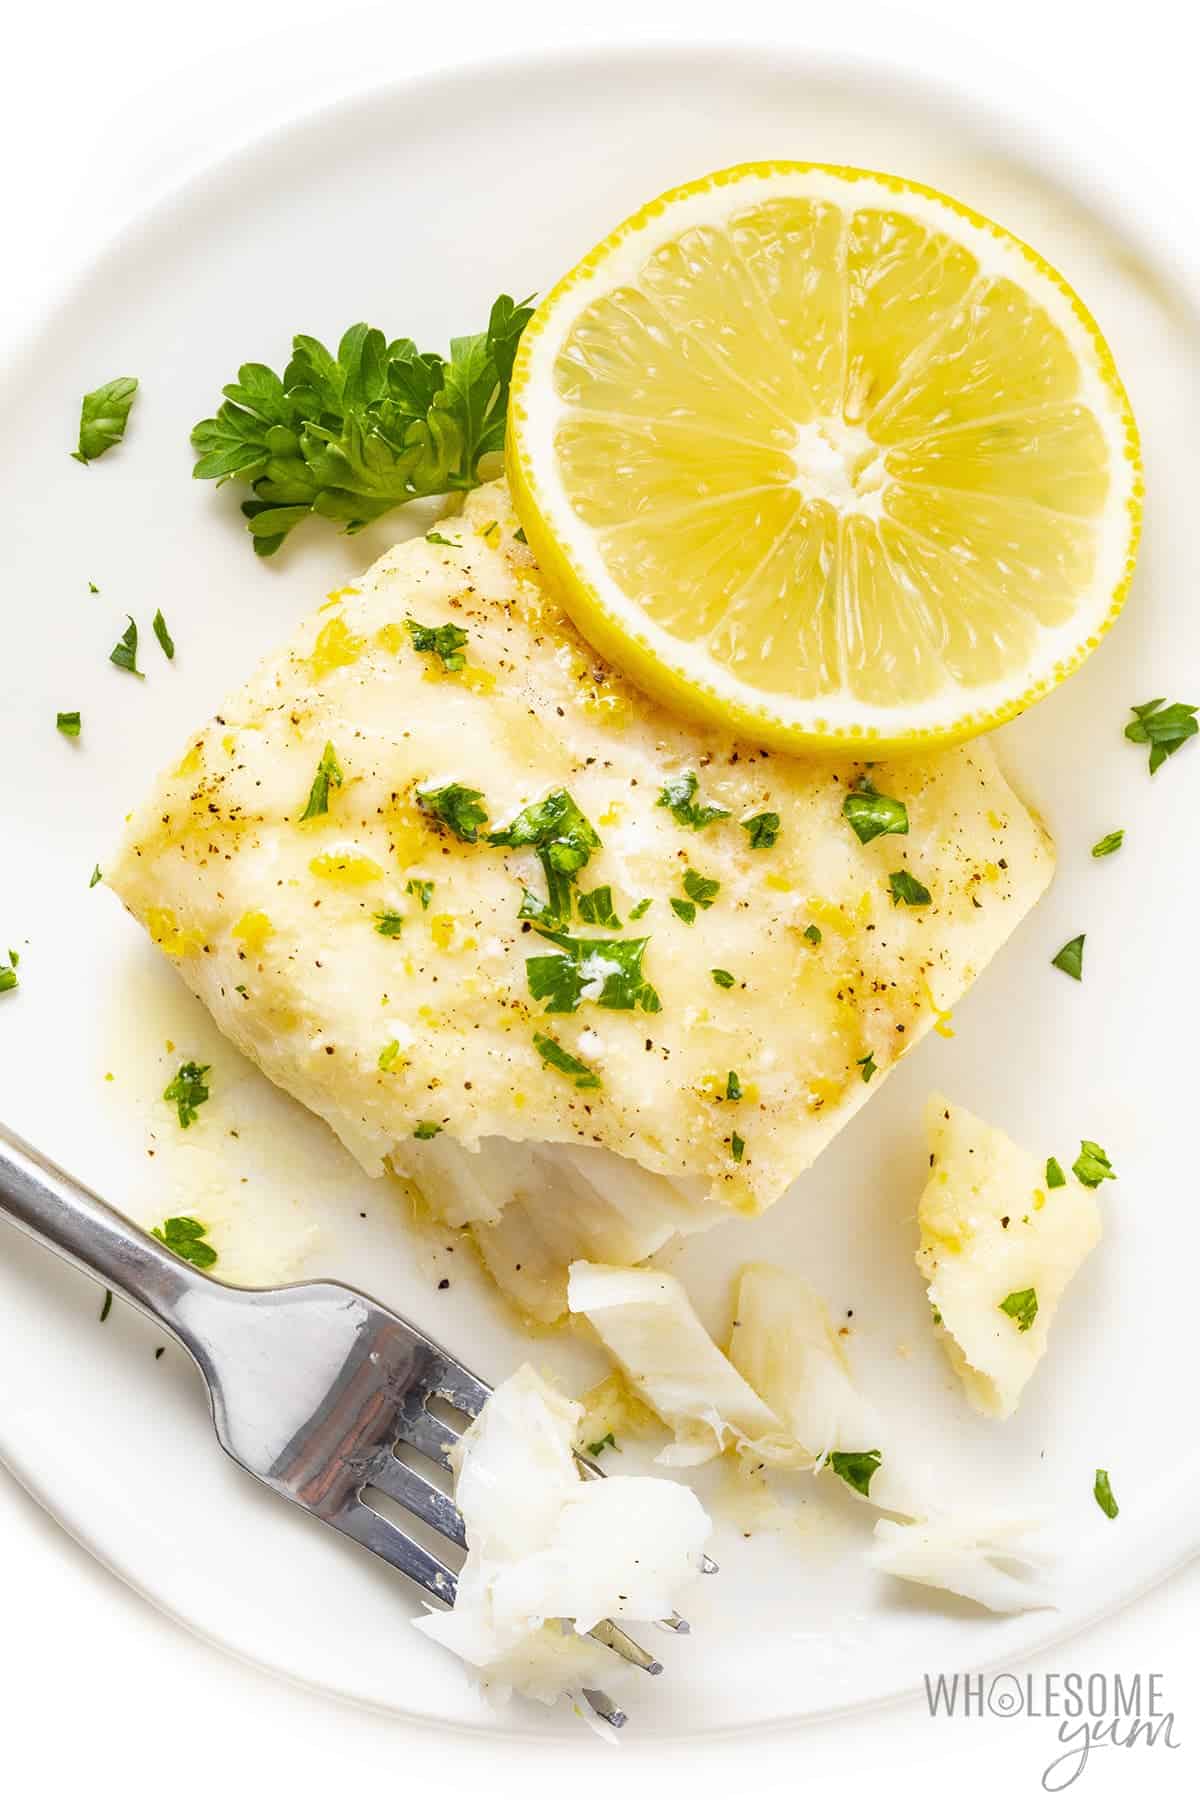 Baked cod recipe on a plate with fork and lemon slice